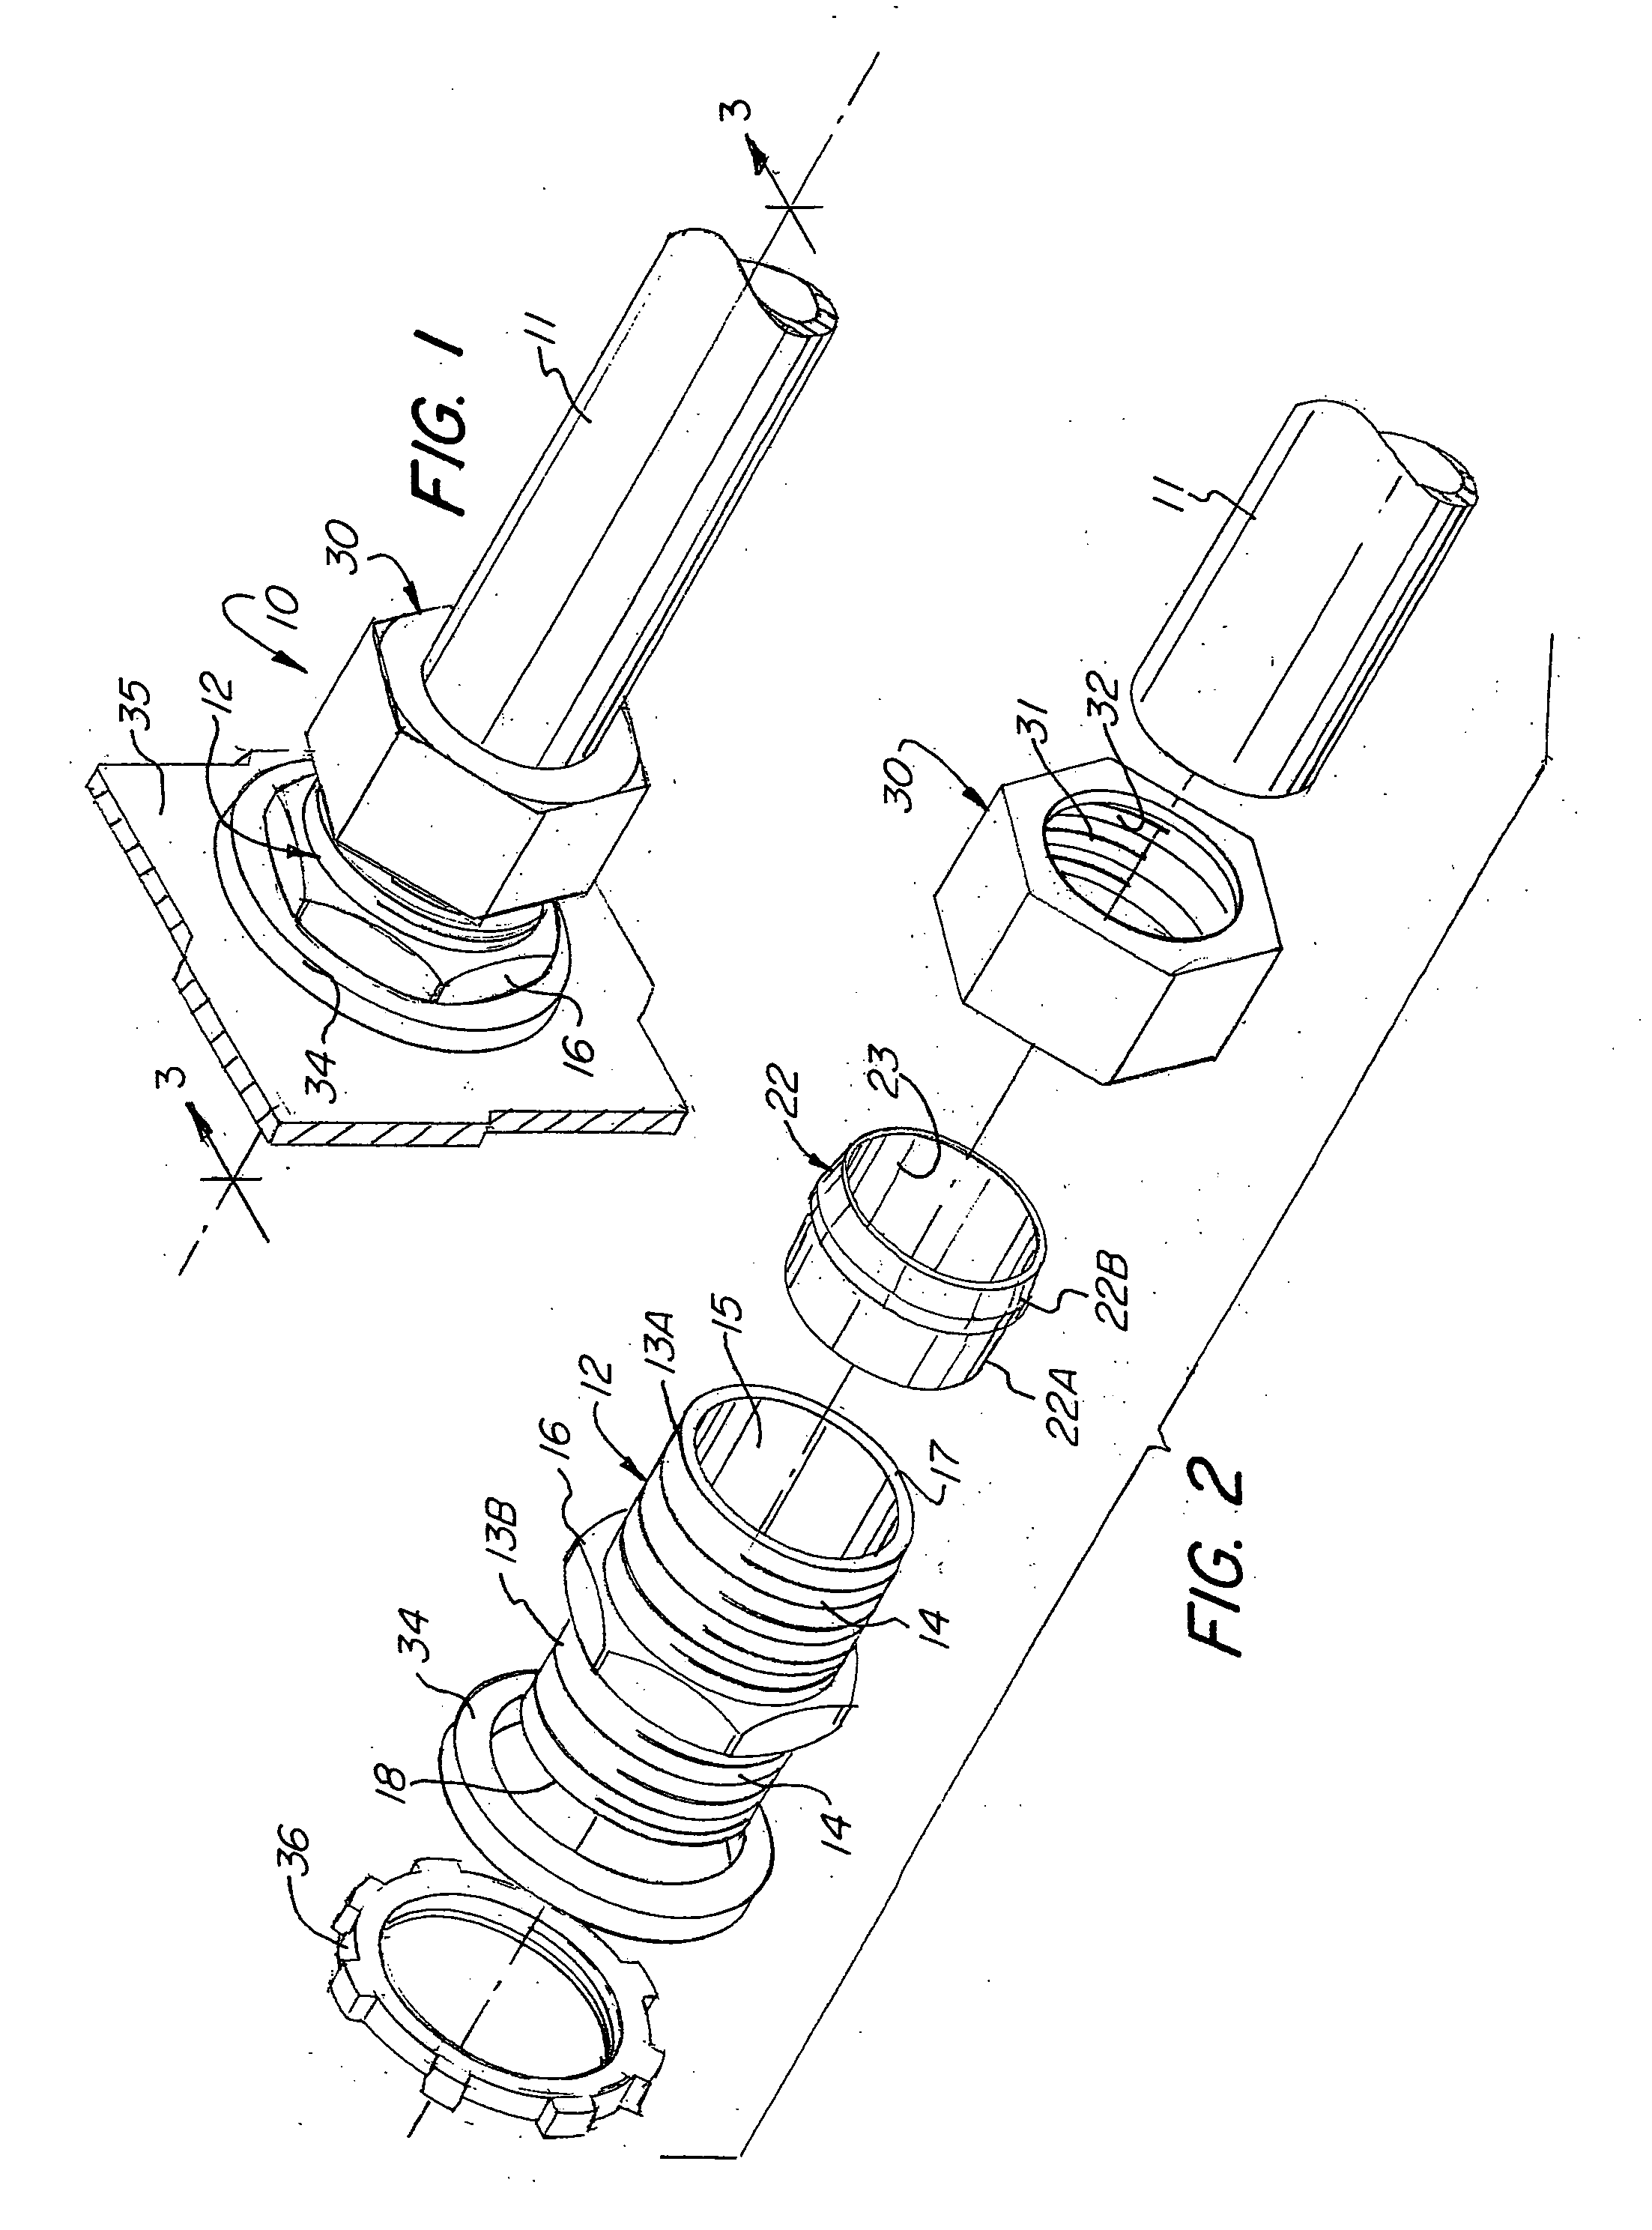 Electrical connection assembly with unitary sealing and compression ring